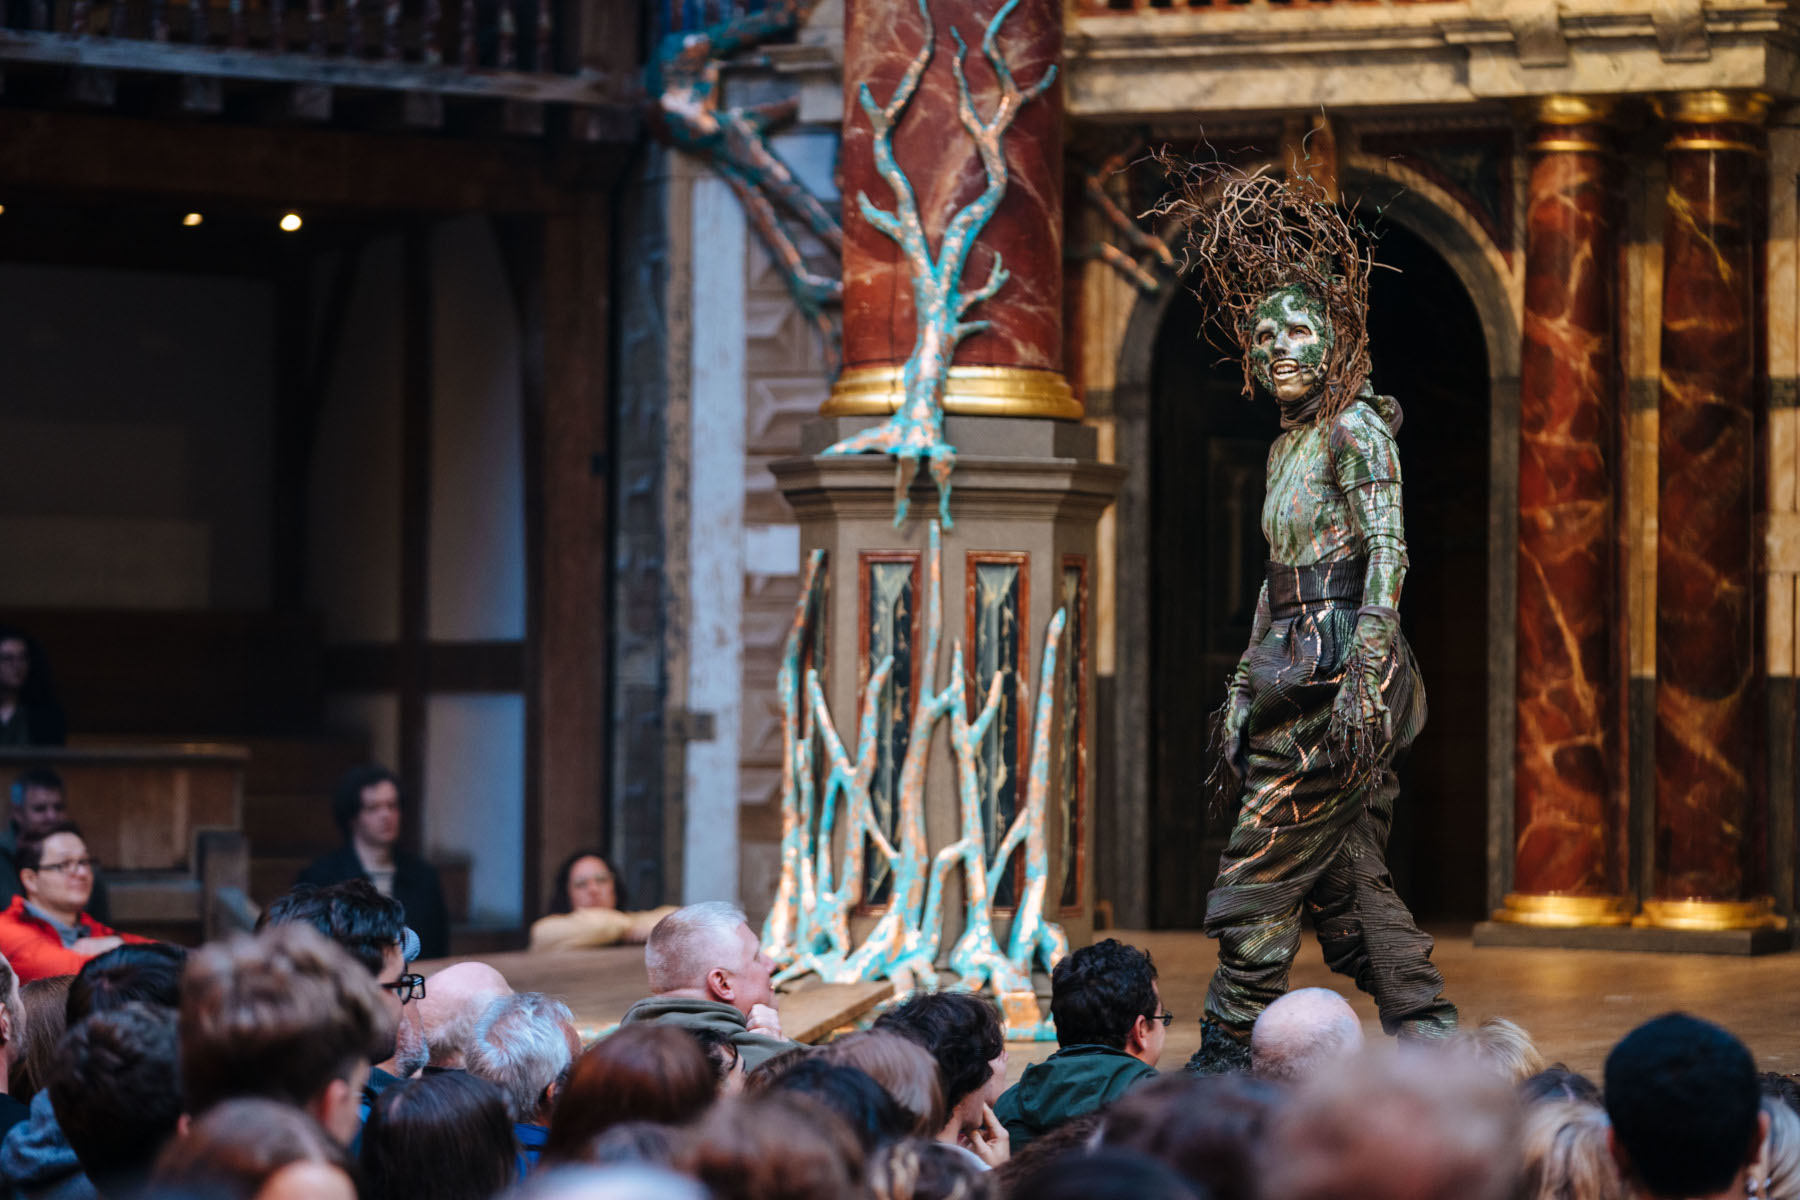 Michelle Terry as Puck in A Midsummer Night's Dream at Shakespeare's Globe (c. Helen Murray)